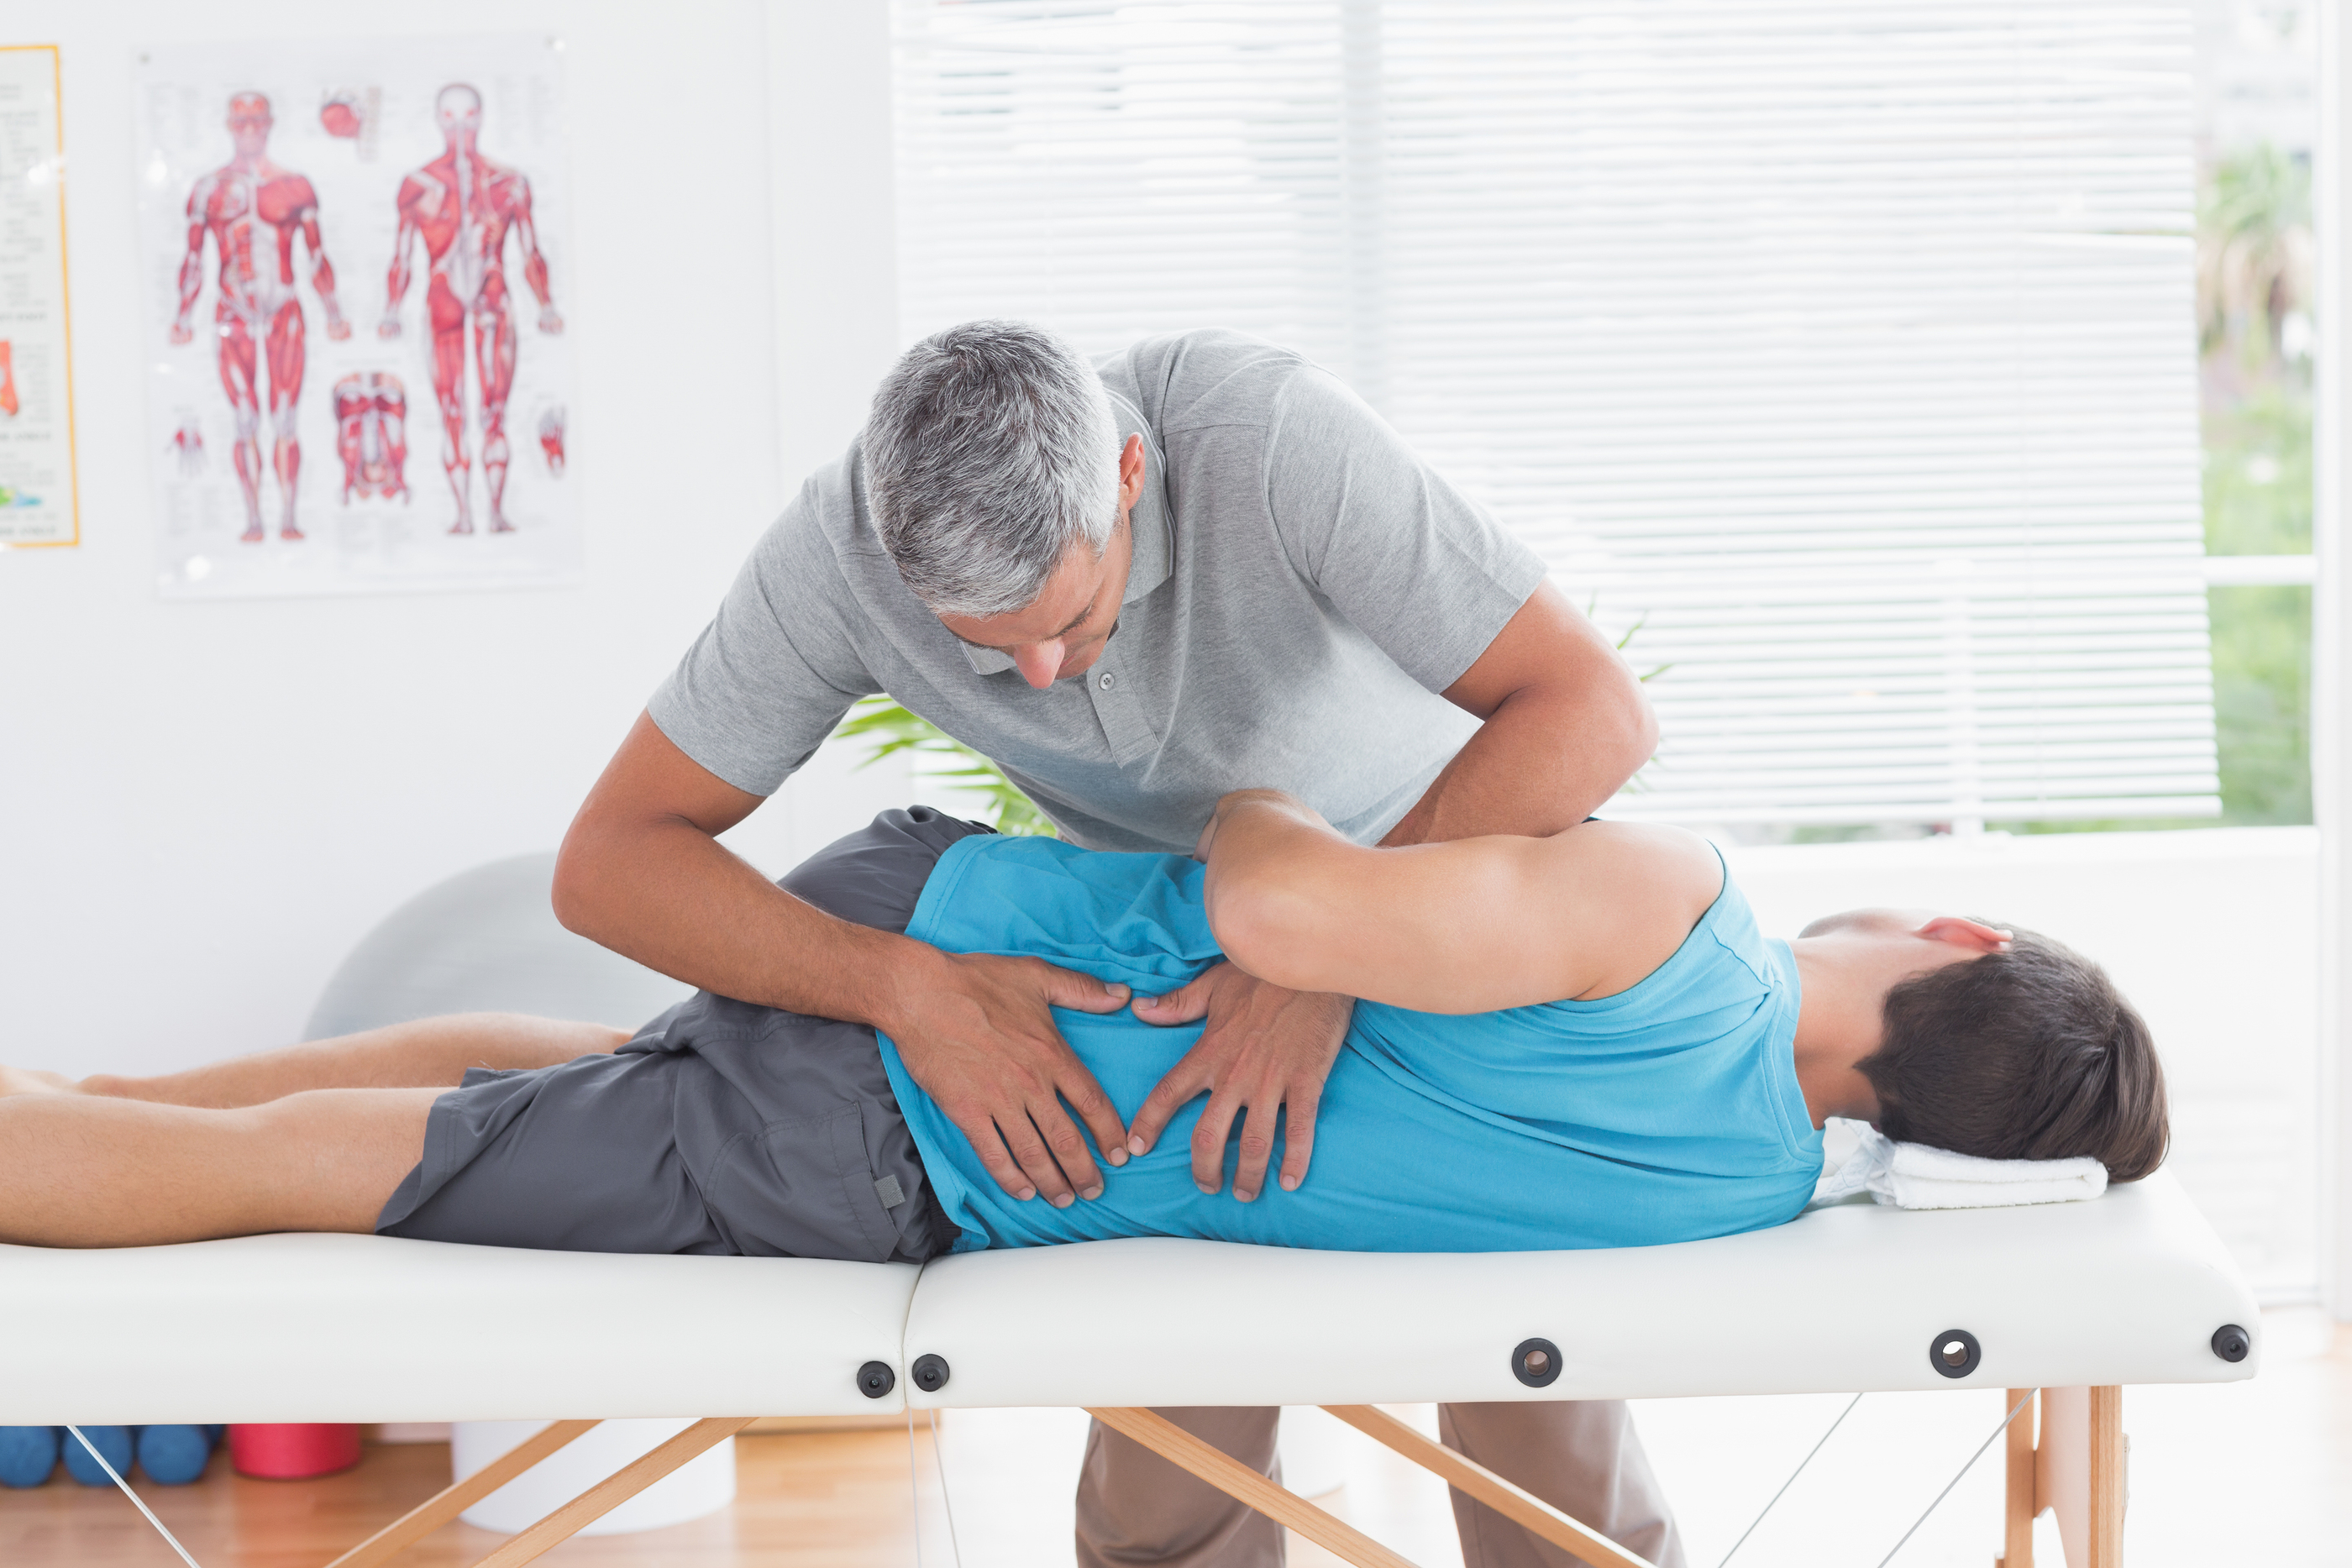 Back Injuries After Auto Accidents: Injury Types And Treatment Options